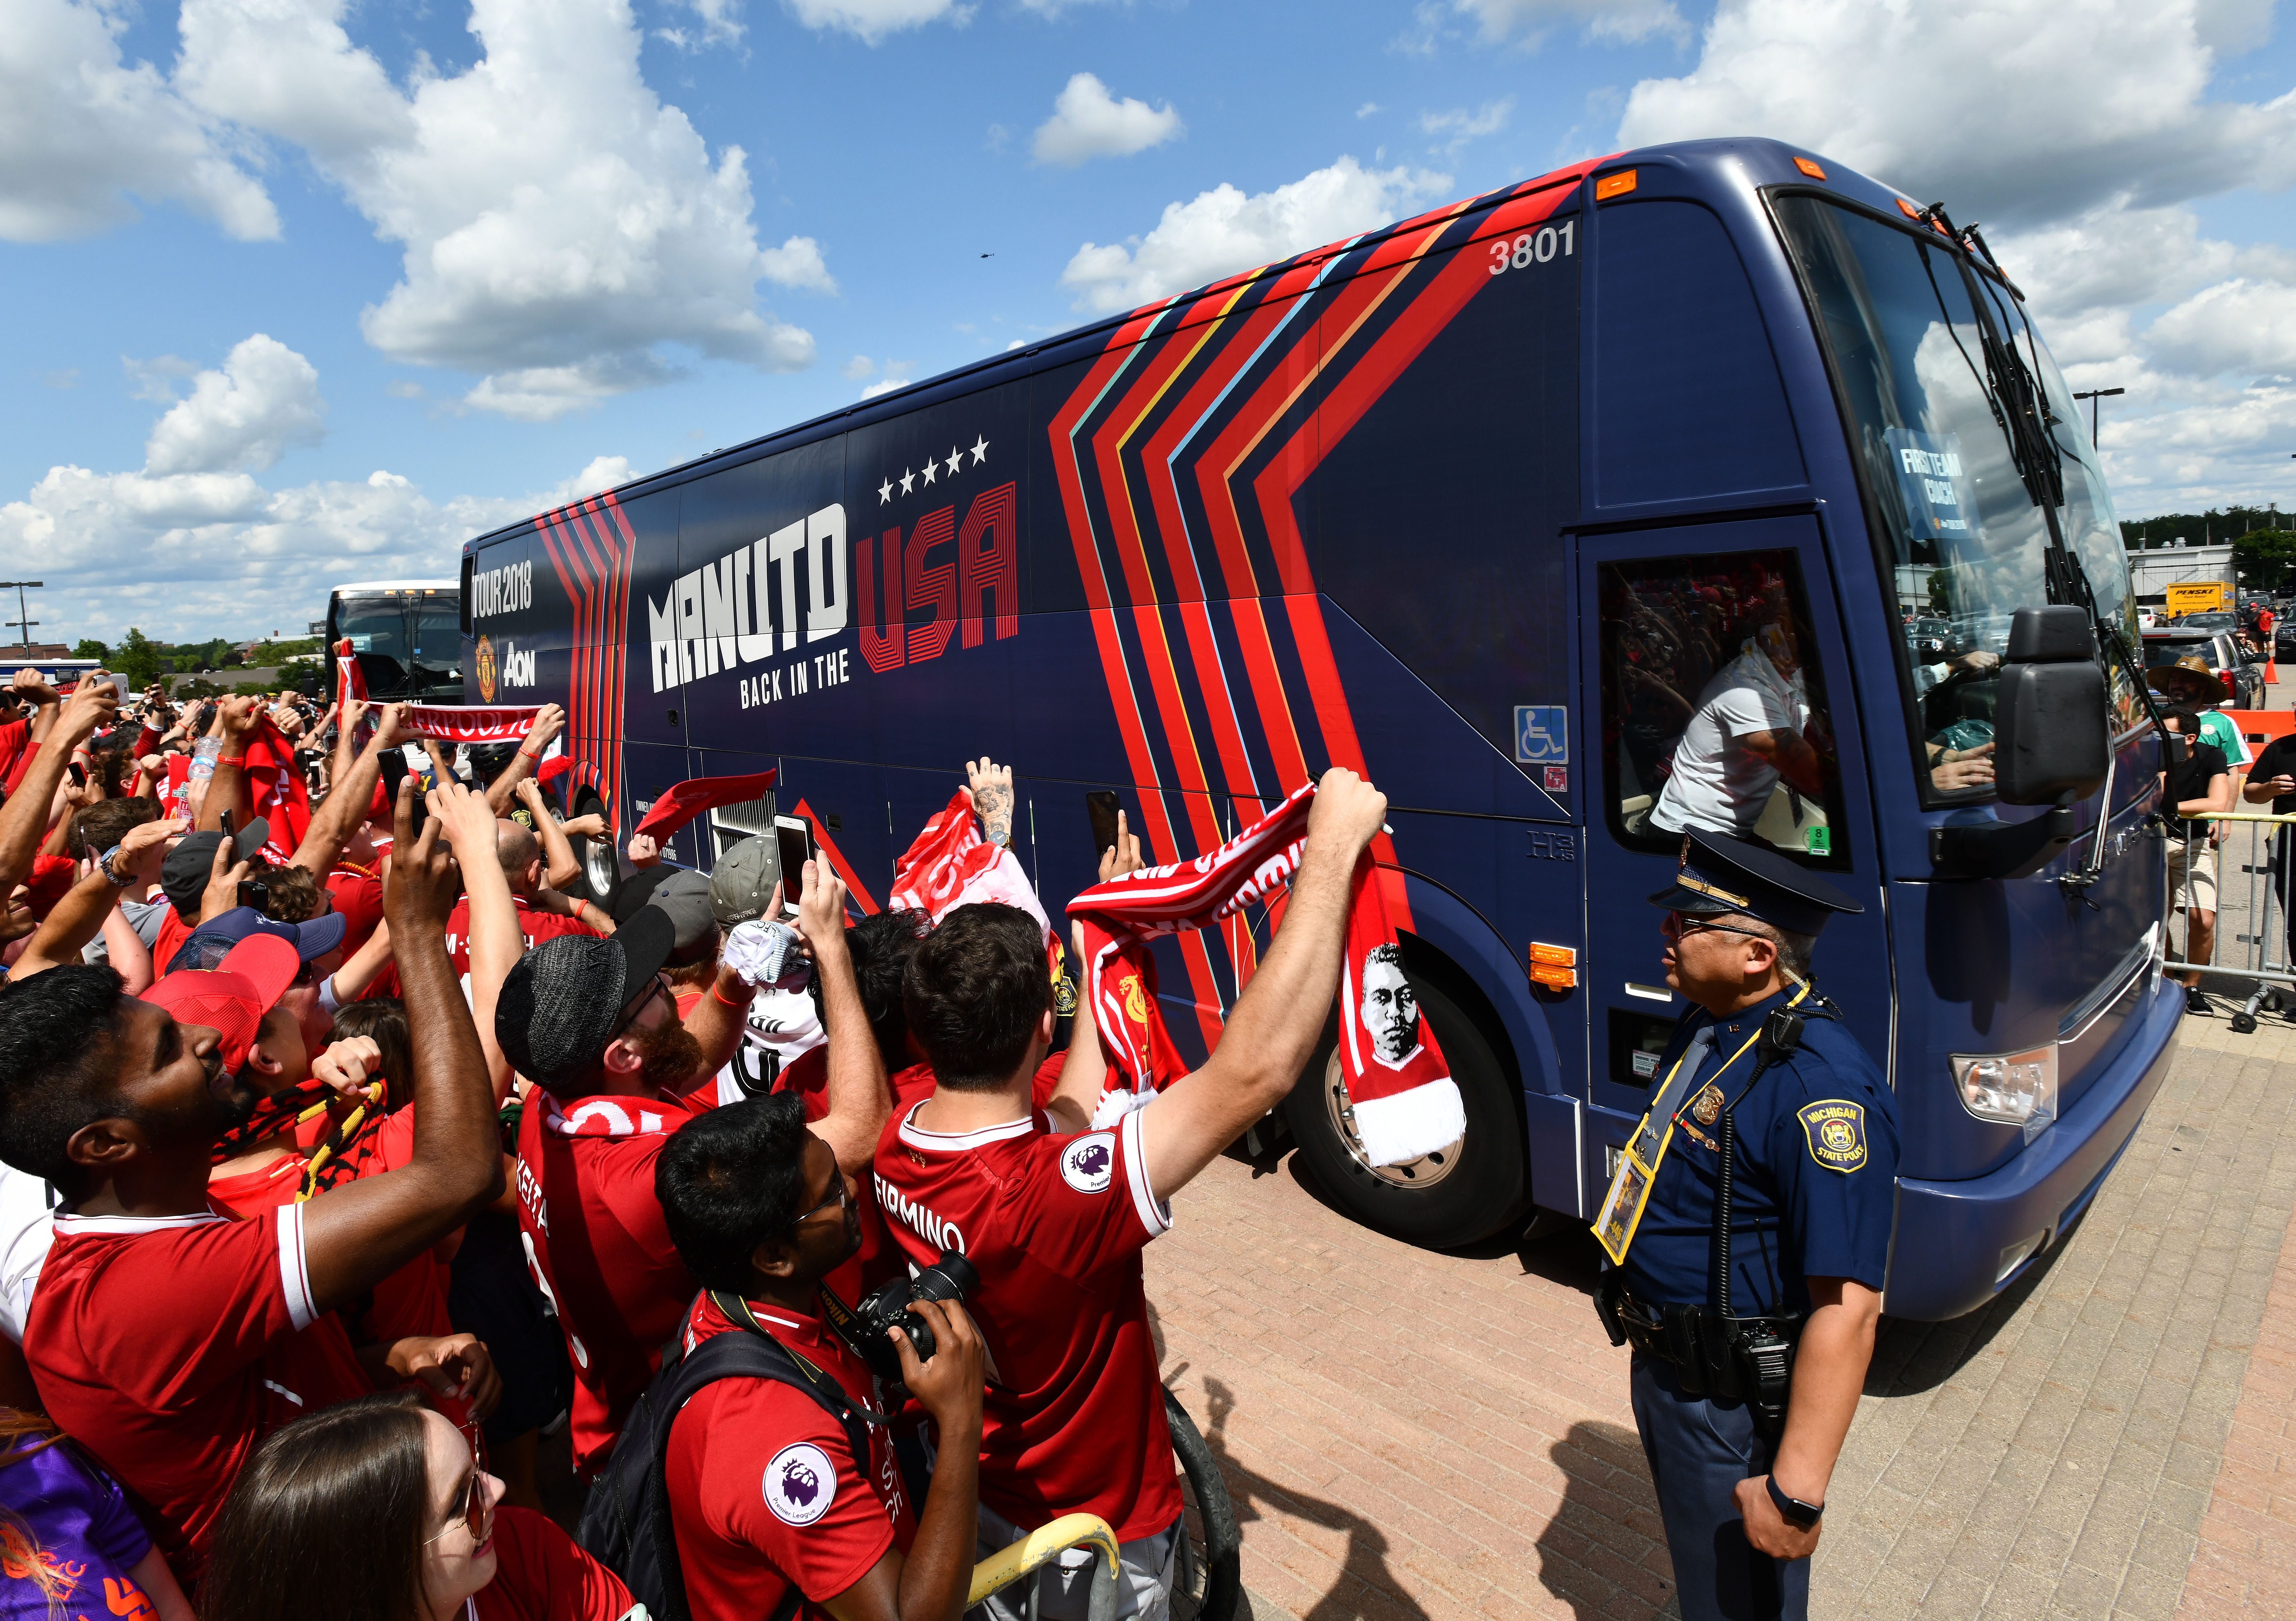 The Manchester United bus arrives at Michigan Stadium.